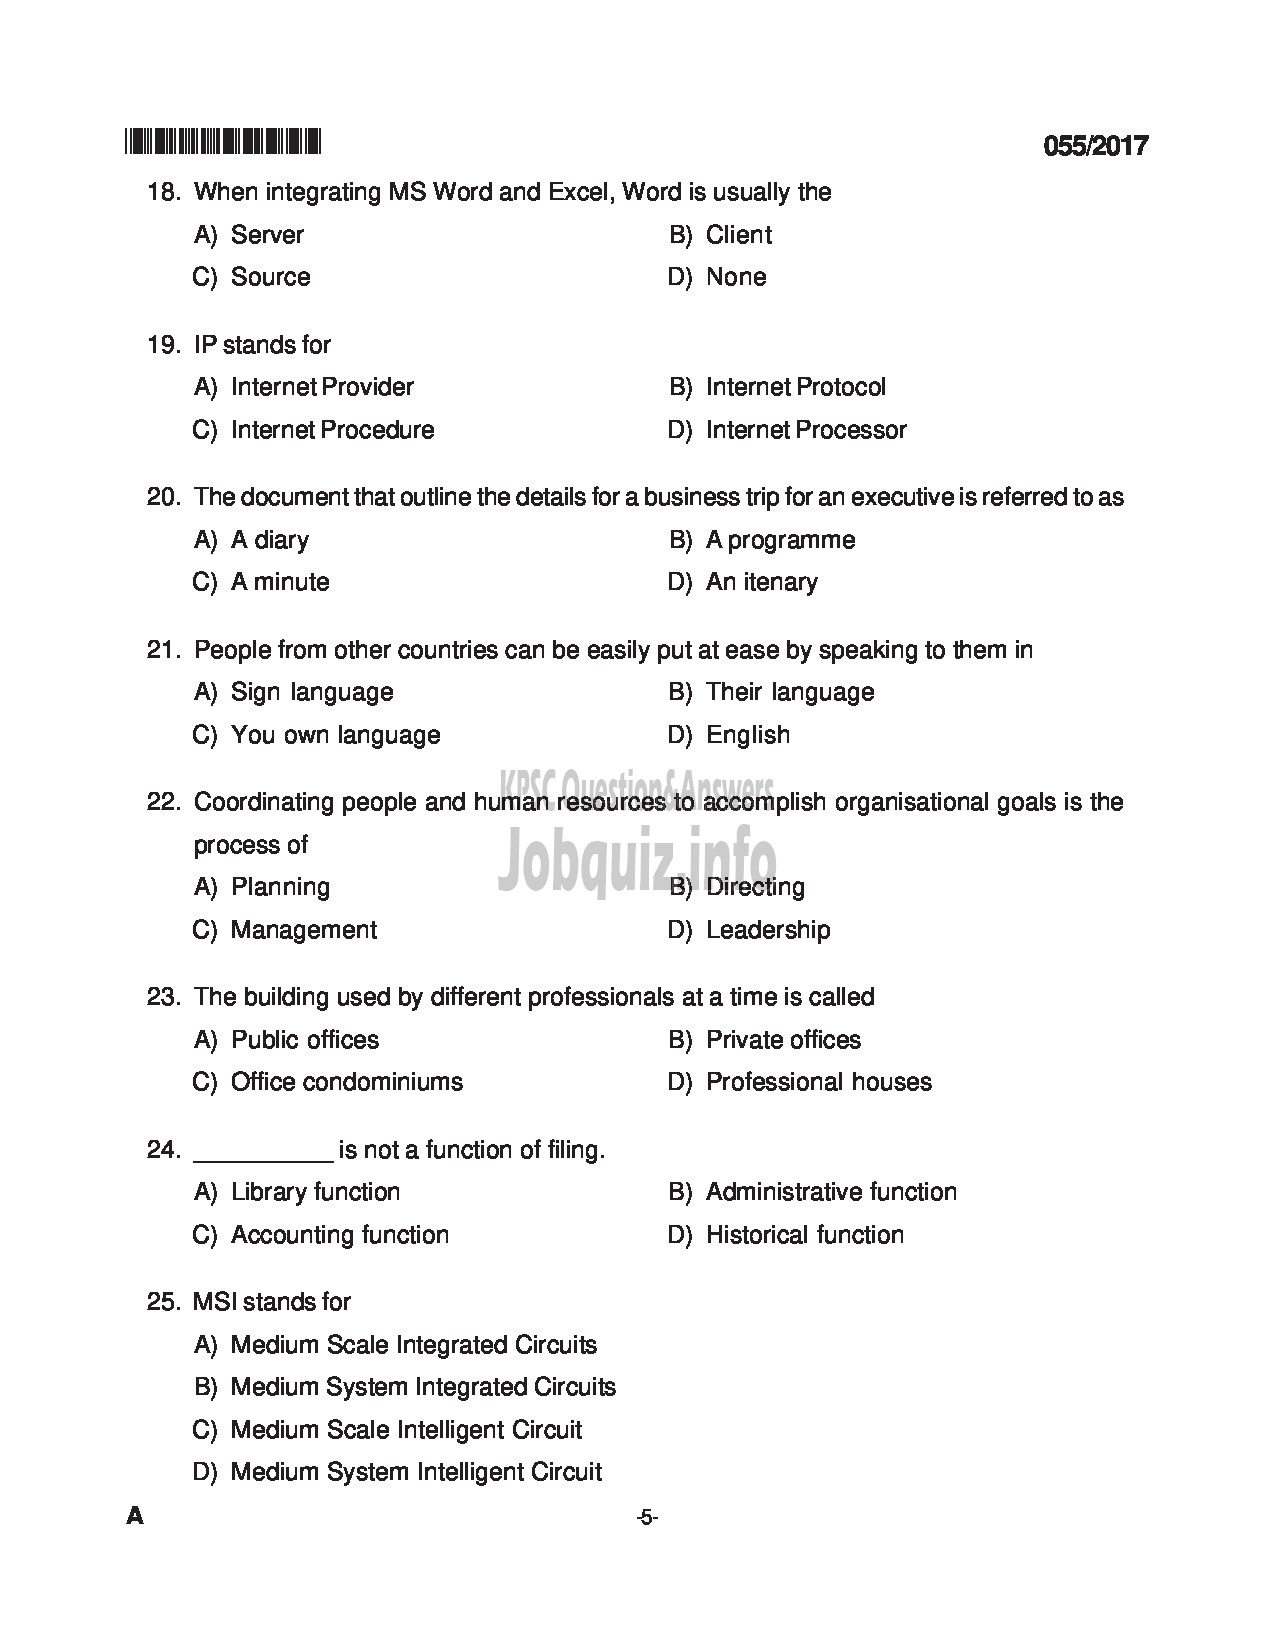 Kerala PSC Question Paper - INSTRUCTOR IN SECRETARIAL PRACTICE AND BM TECHNICAL EDUCATION QUESTION PAPER-5